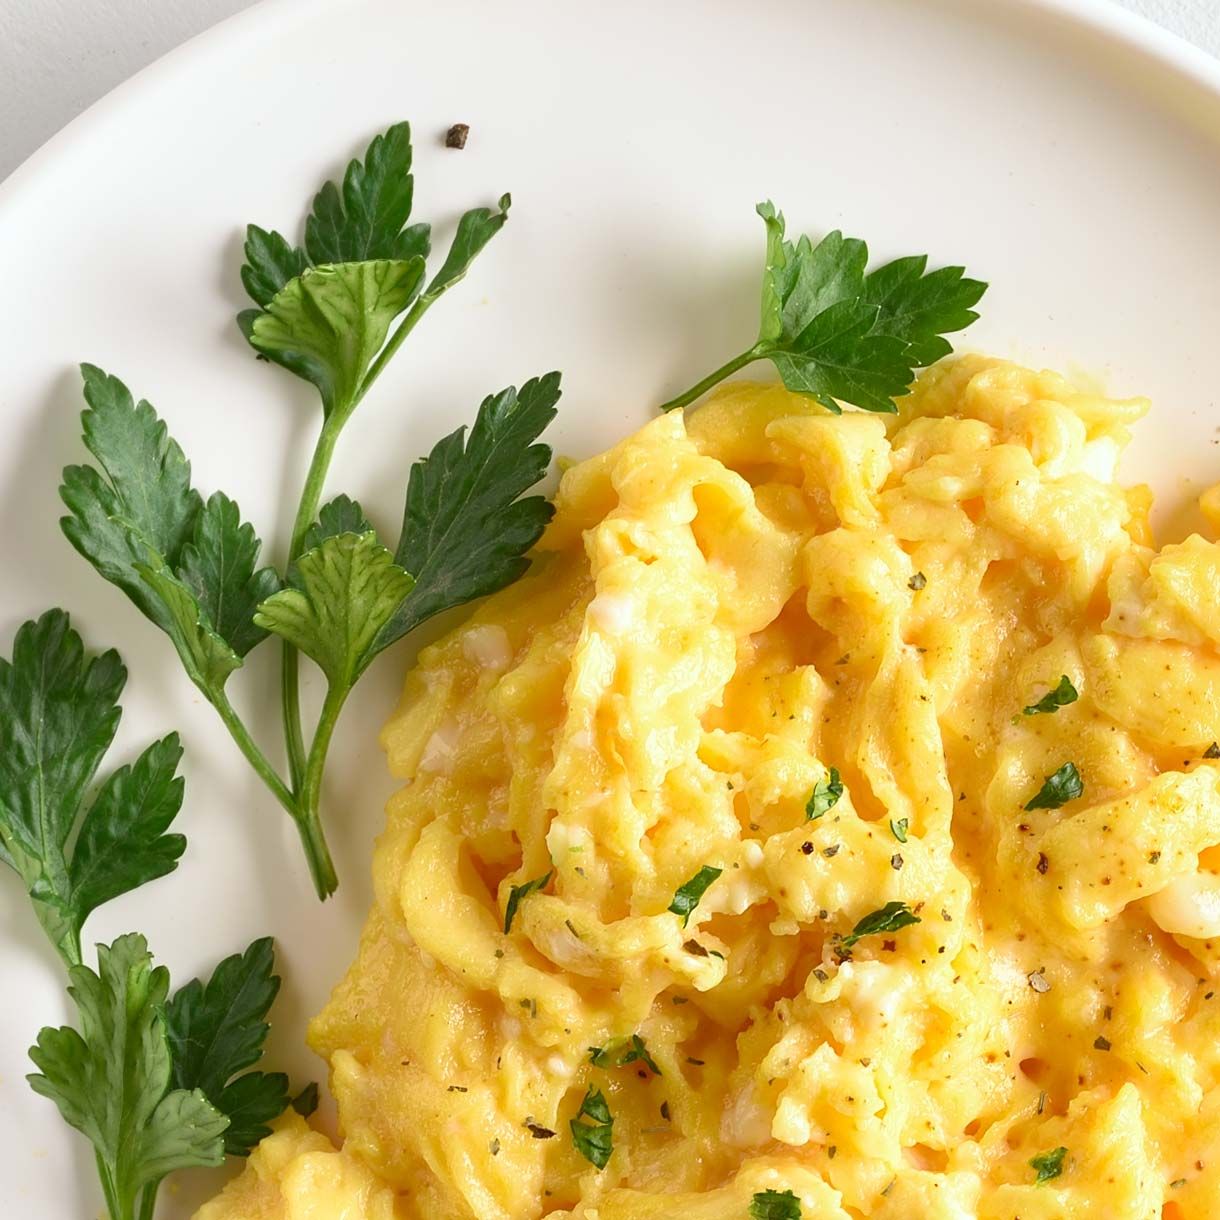 Scrambled eggs cooked on a plate